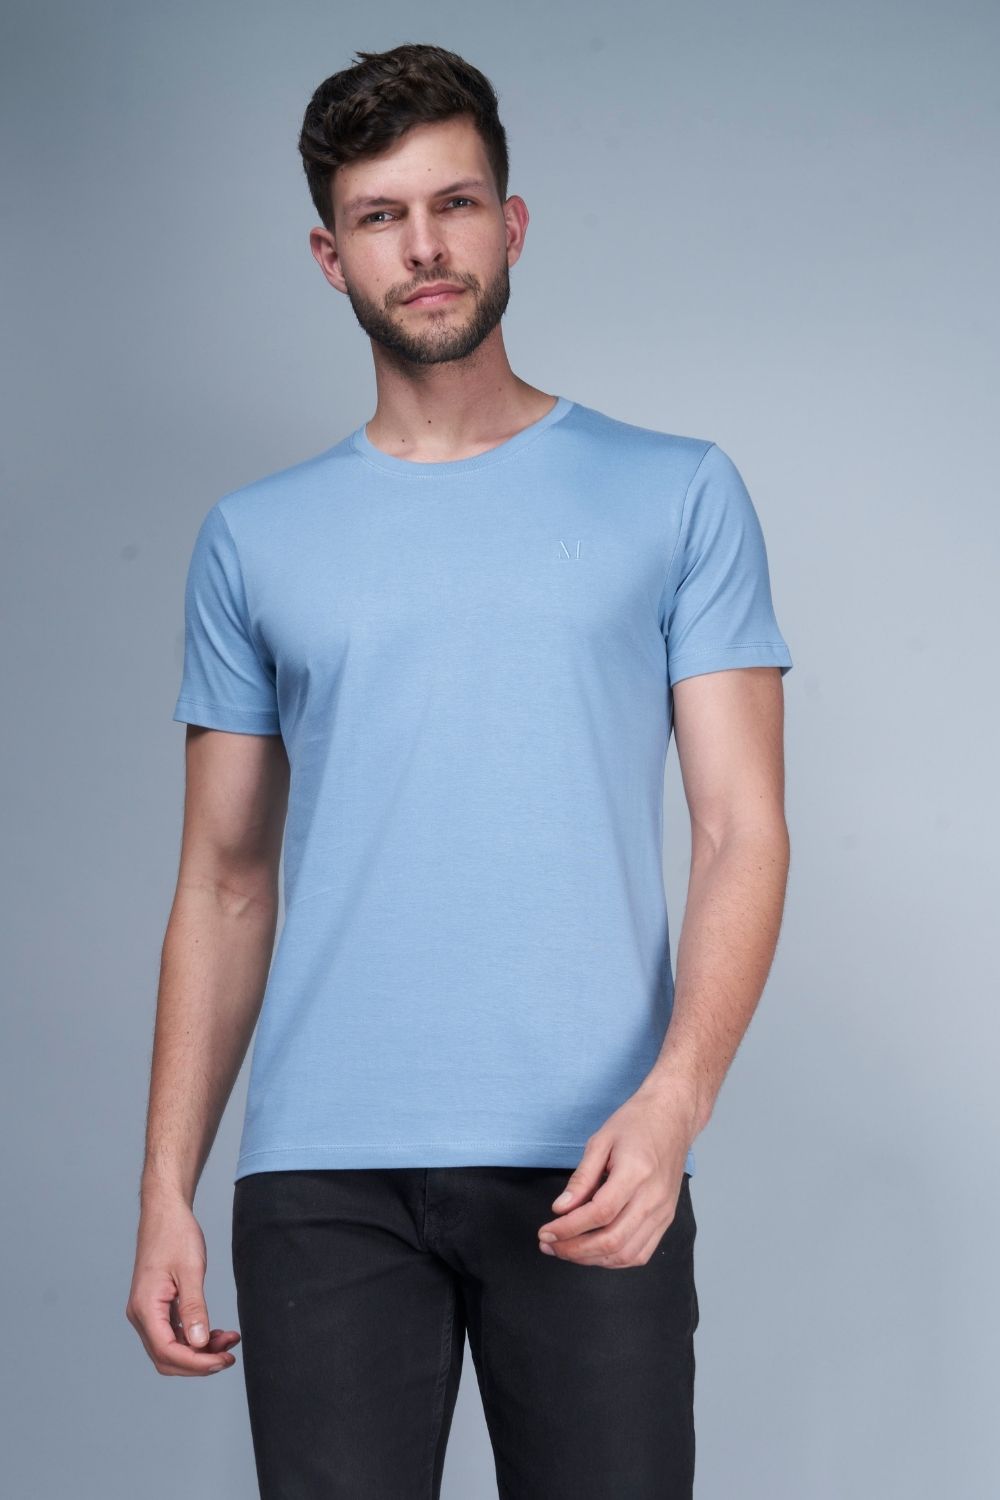 Sky Blue colored, Solid T shirt for men, with half sleeves and round neck, front view.